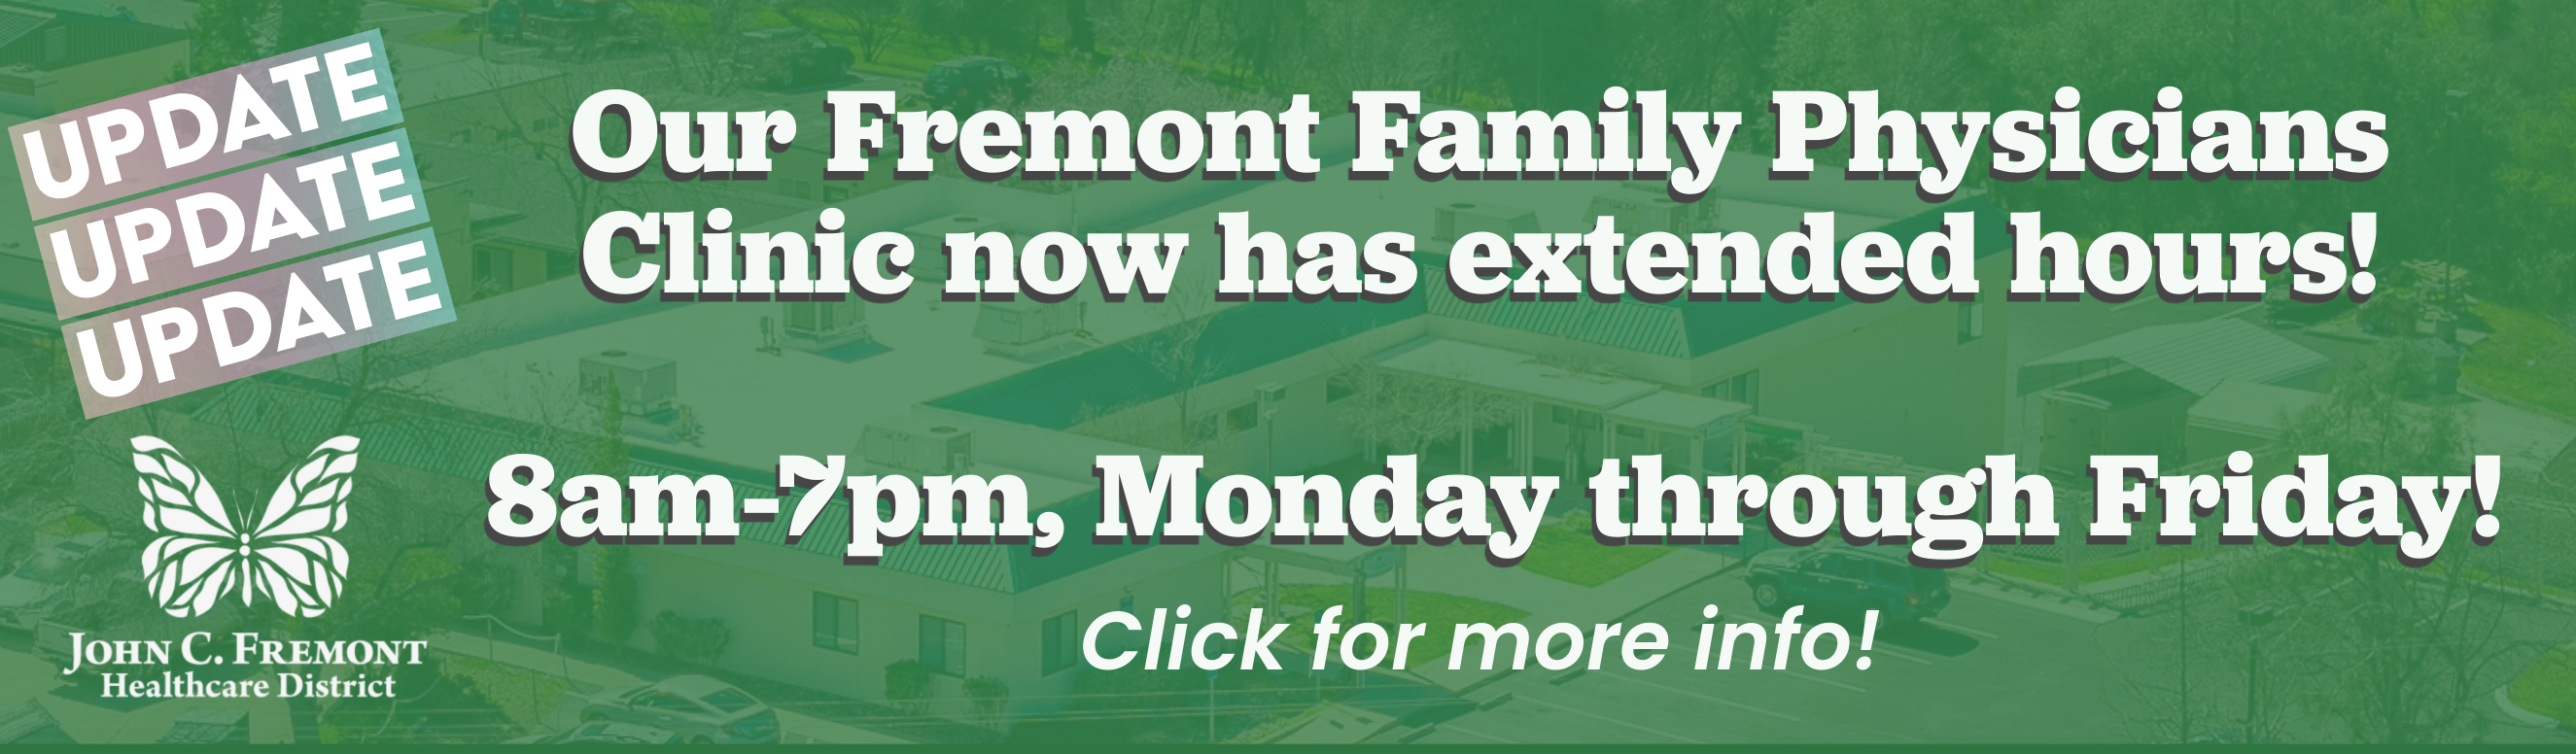 UPDATE: Our Fremont Family Physicians Clinic now has extended hours, 8am-7pm, Monday through Friday. Click for more info.